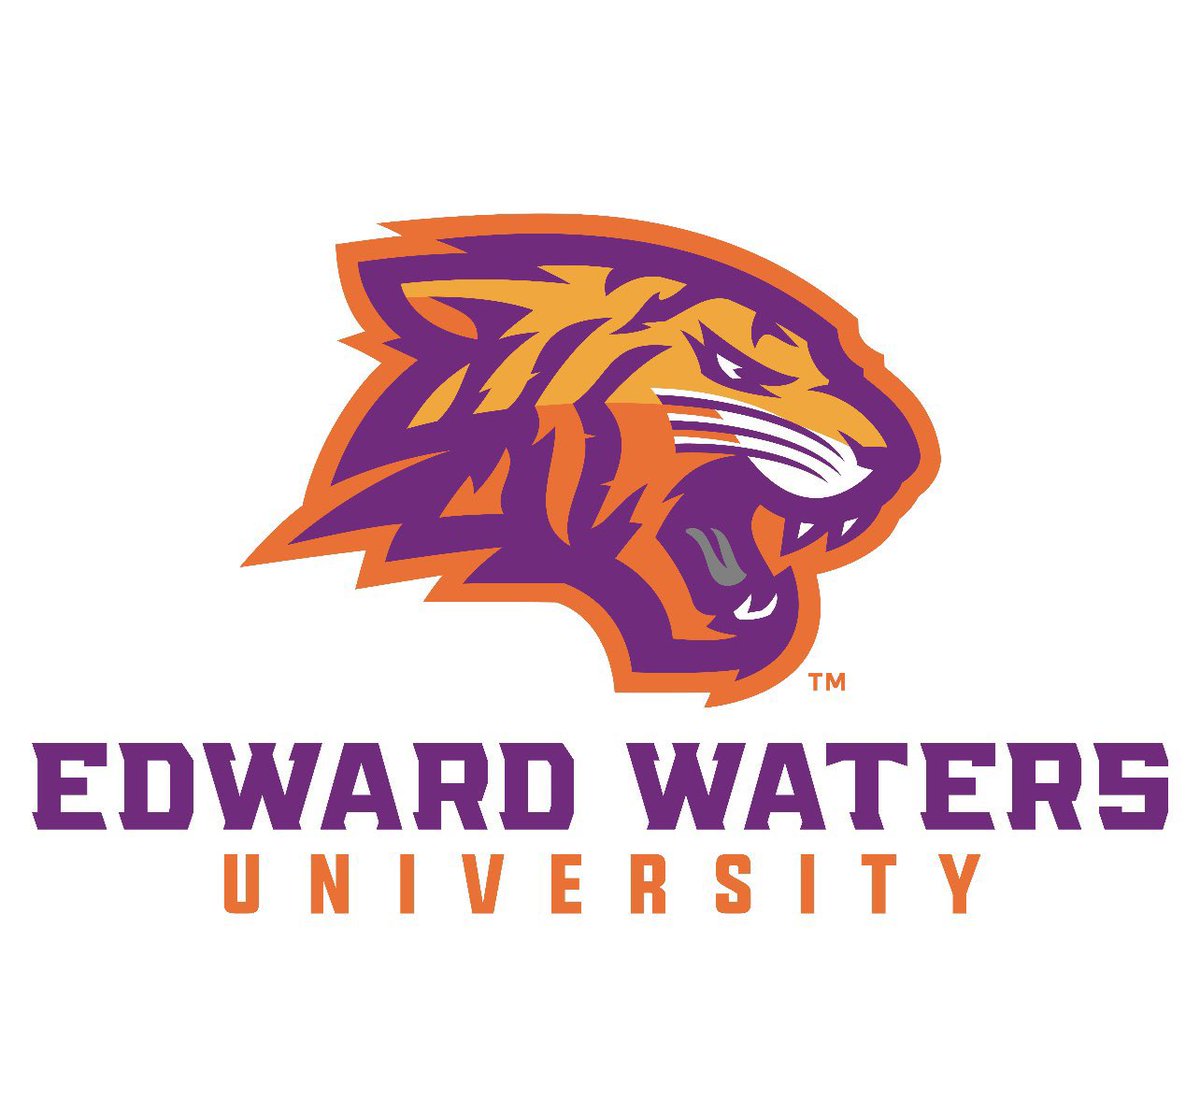 I’m excited to announce that I will be continuing my career at Edward Waters University. I would like to thank House of Arms and Alex Latow for helping me get to the point I’m at today. Also I would like to thank all my friends and family for supporting me. @CoachJohnson_44